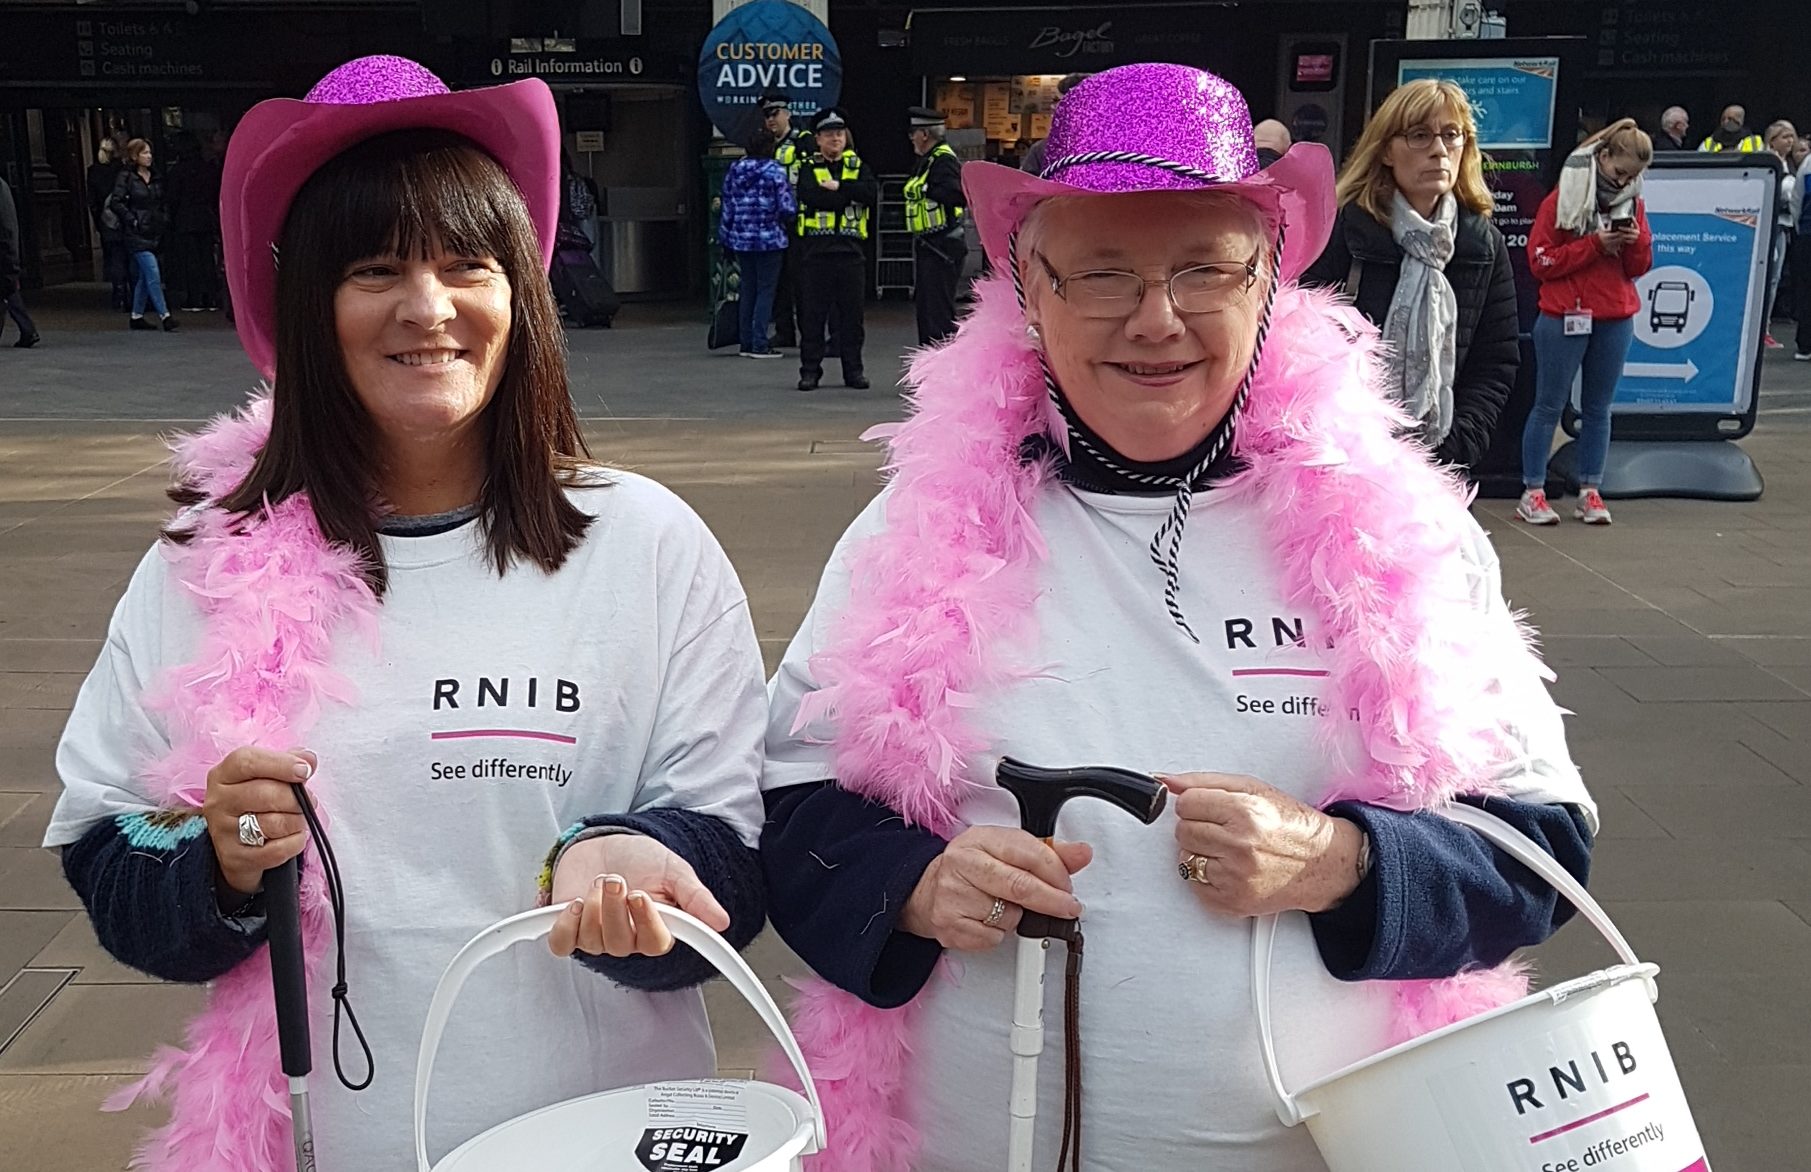 Elizabeth O'Hara (left) is urging others to raise funds for the RNIB.